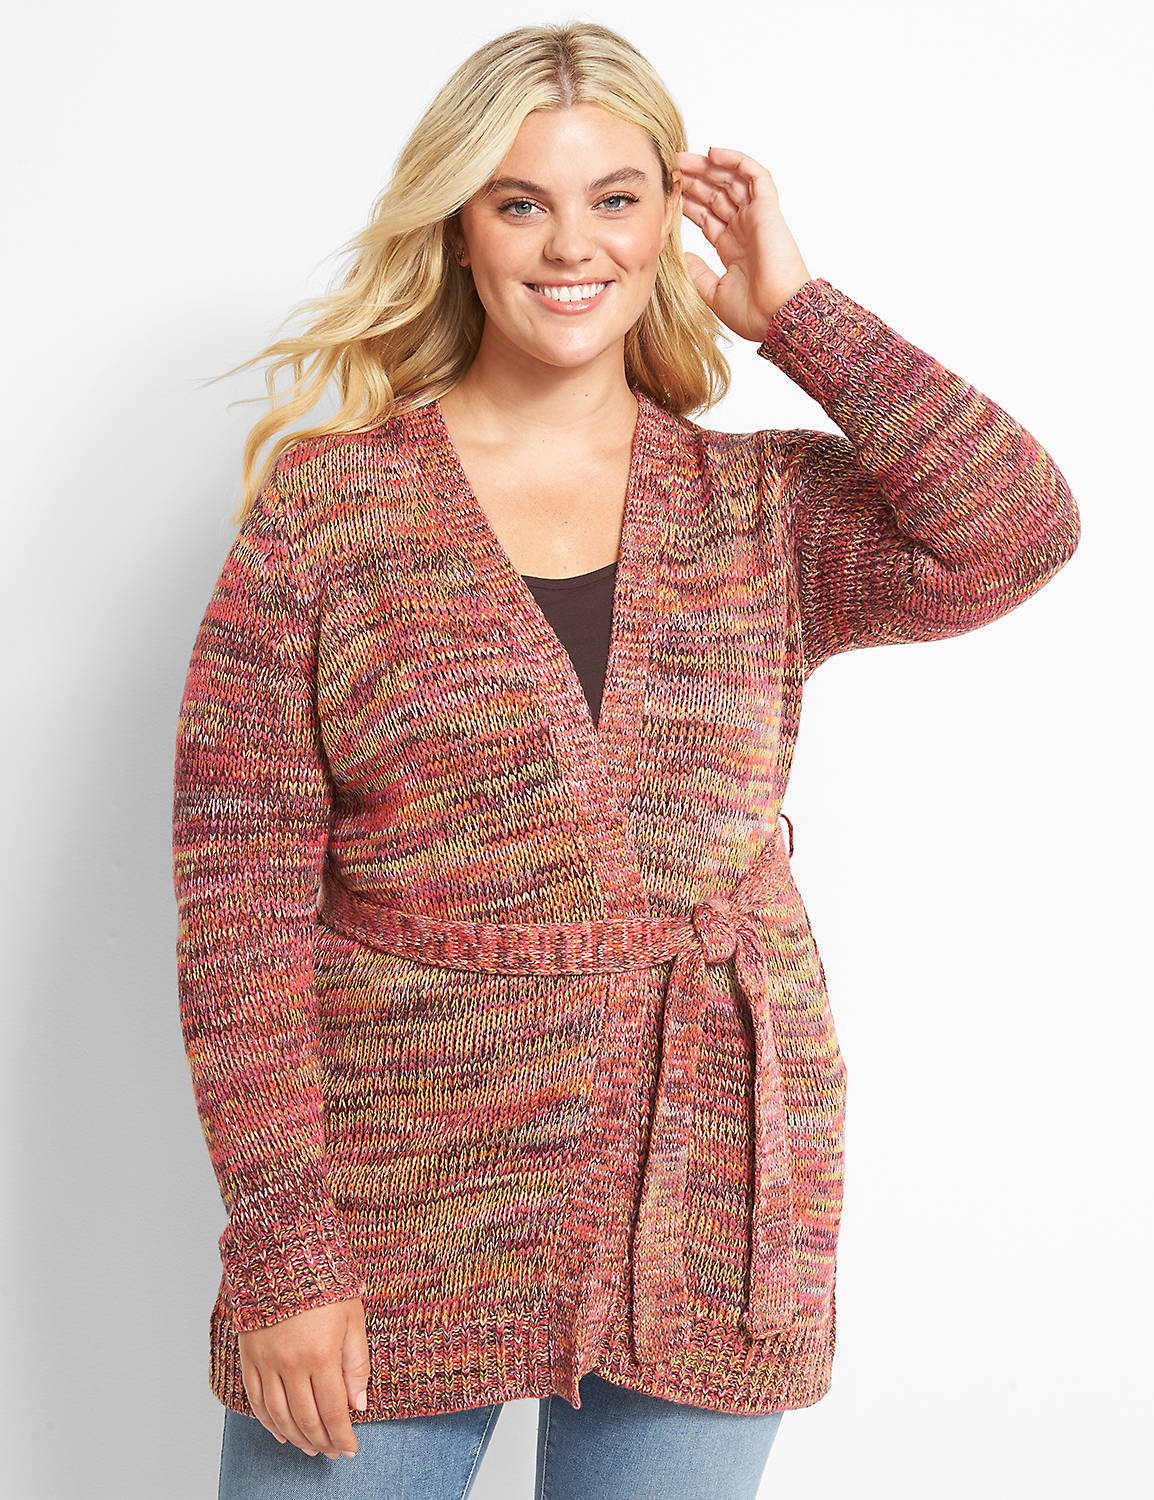 Belted Open Cardigan Product Image 1